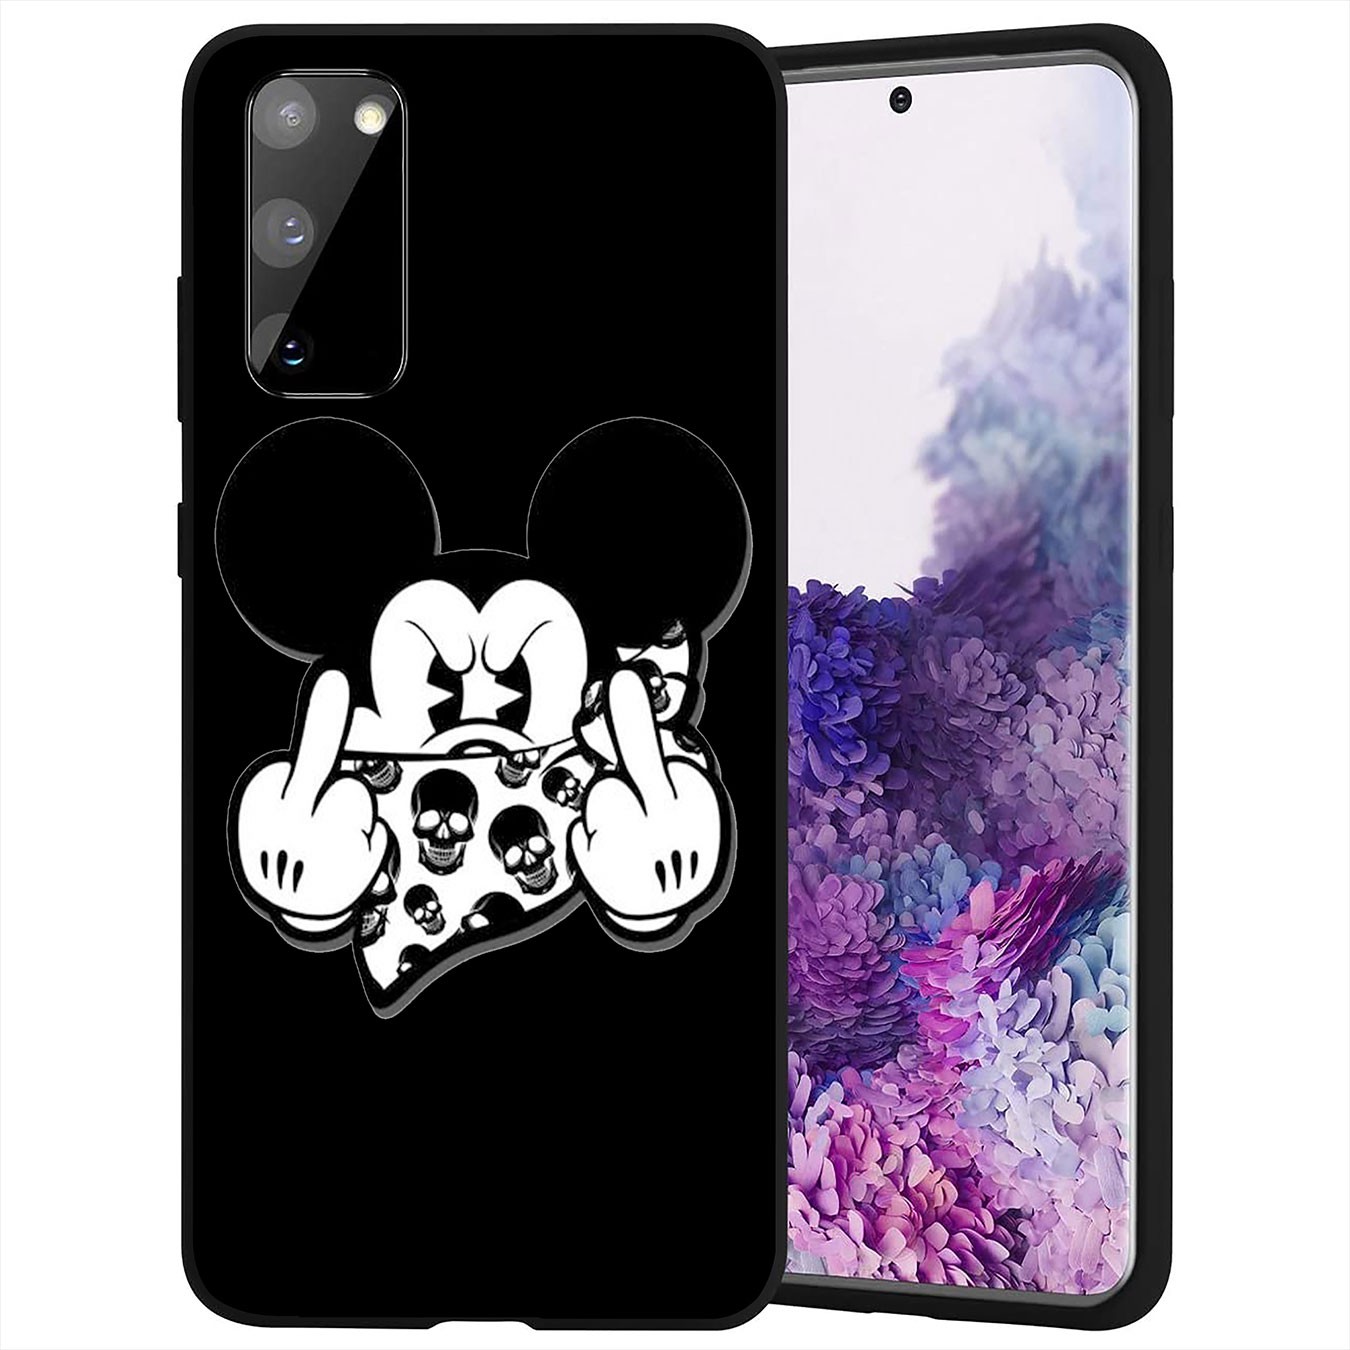 Samsung Galaxy S21 Ultra S8 Plus F62 M62 A2 A32 A52 A72 S21+ S8+ S21Plus Casing Soft Silicone Mickey Mouse Funny Phone Case